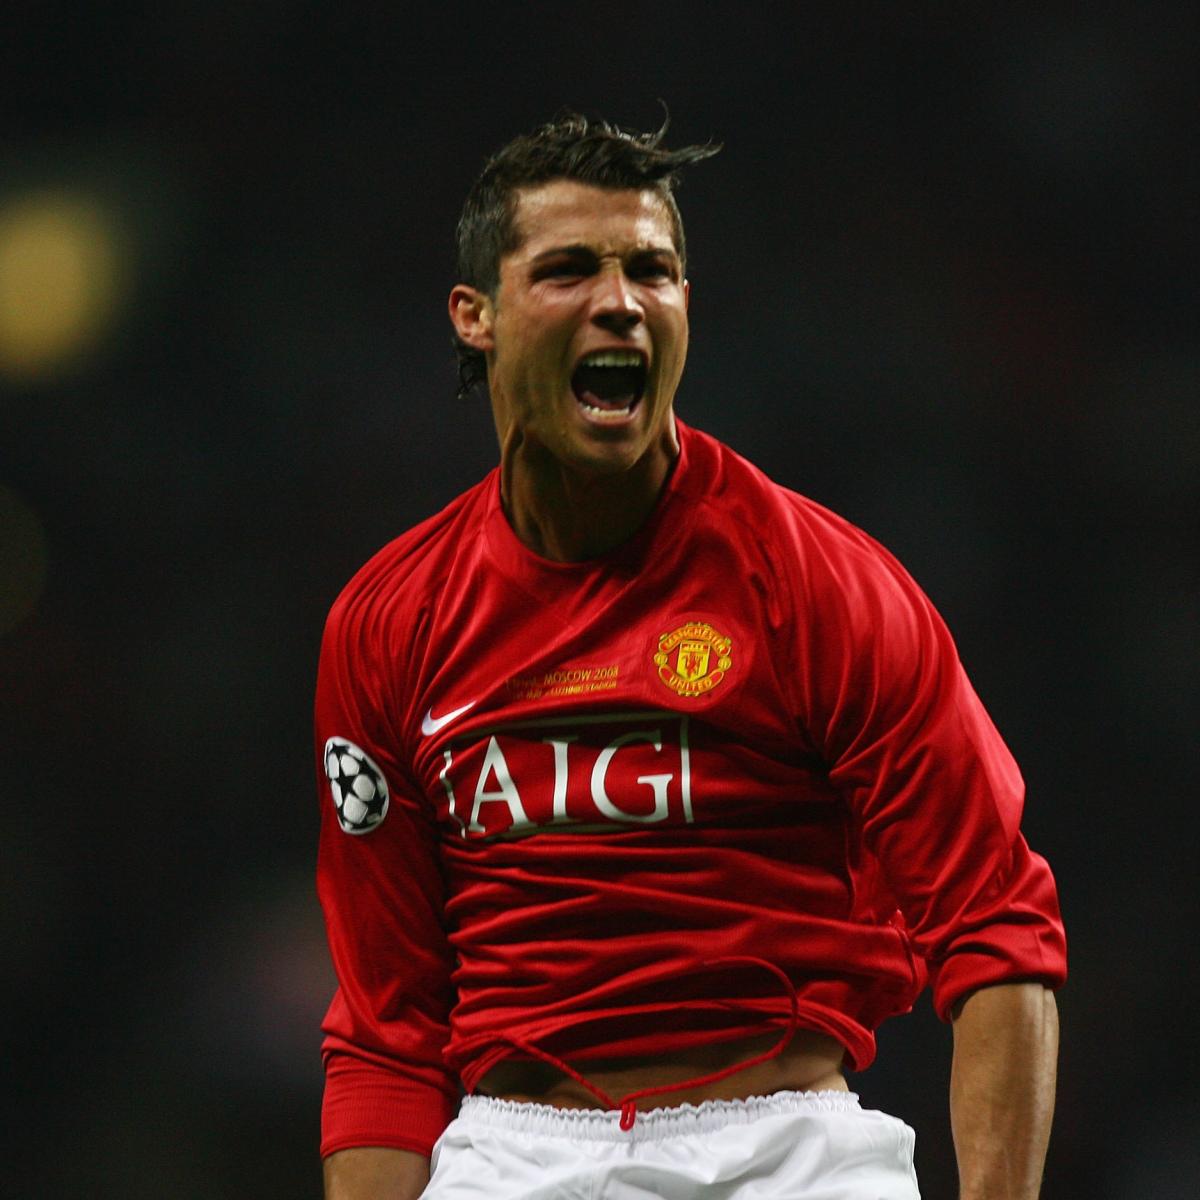 Is Cristiano Ronaldo Now Manchester United's Greatest Ever Player?